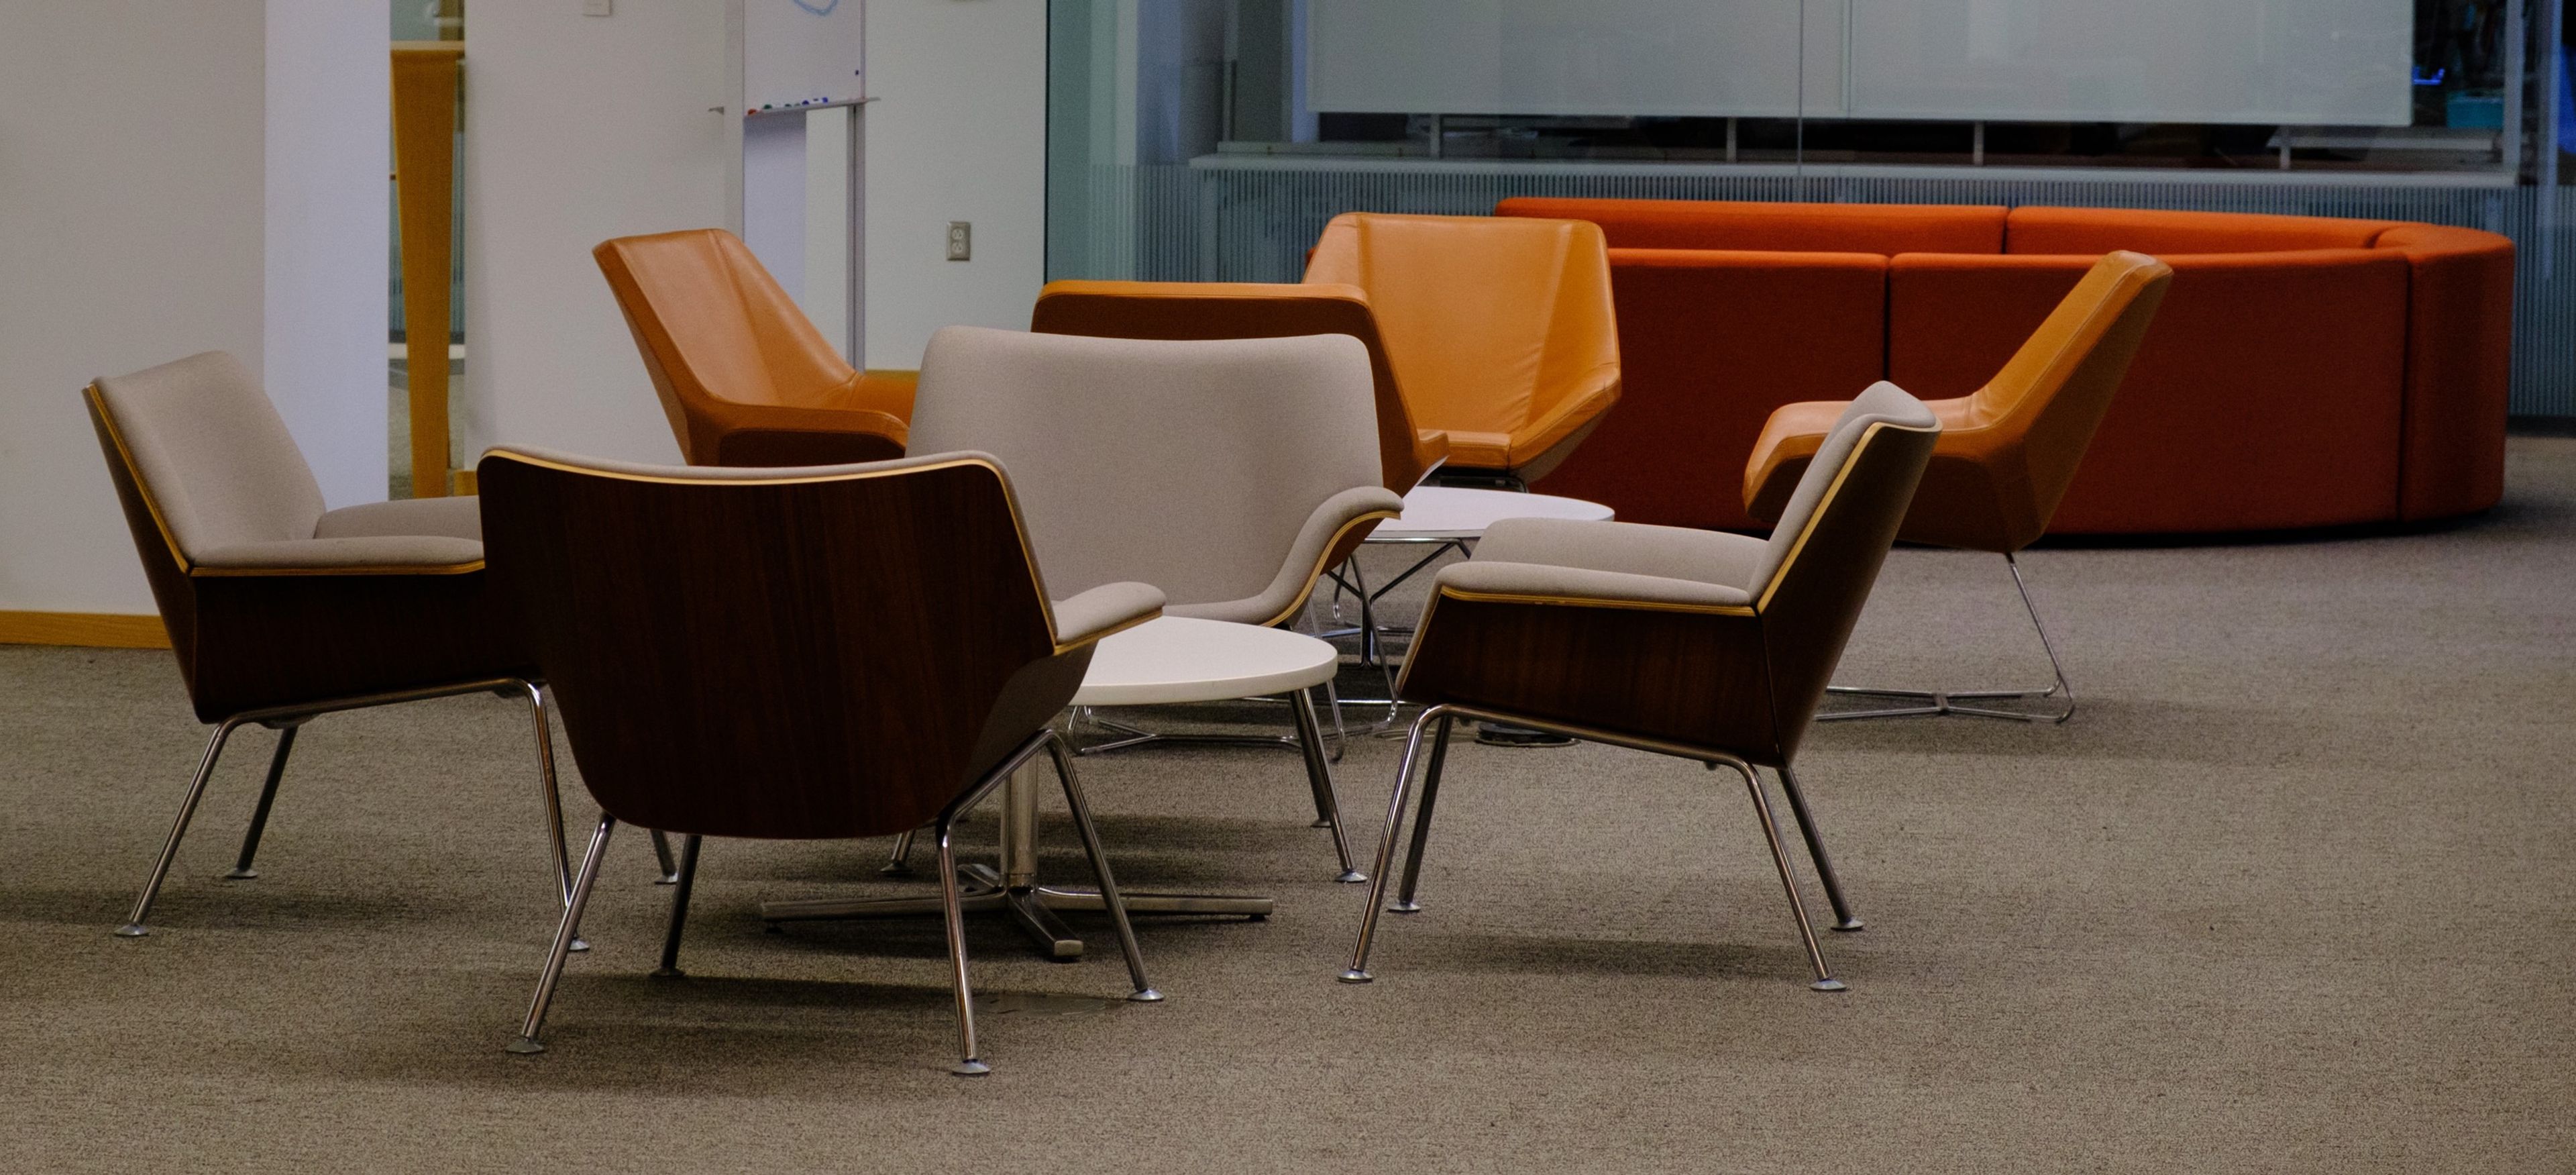 Sterling Memorial Library Mid-century Modern Furniture